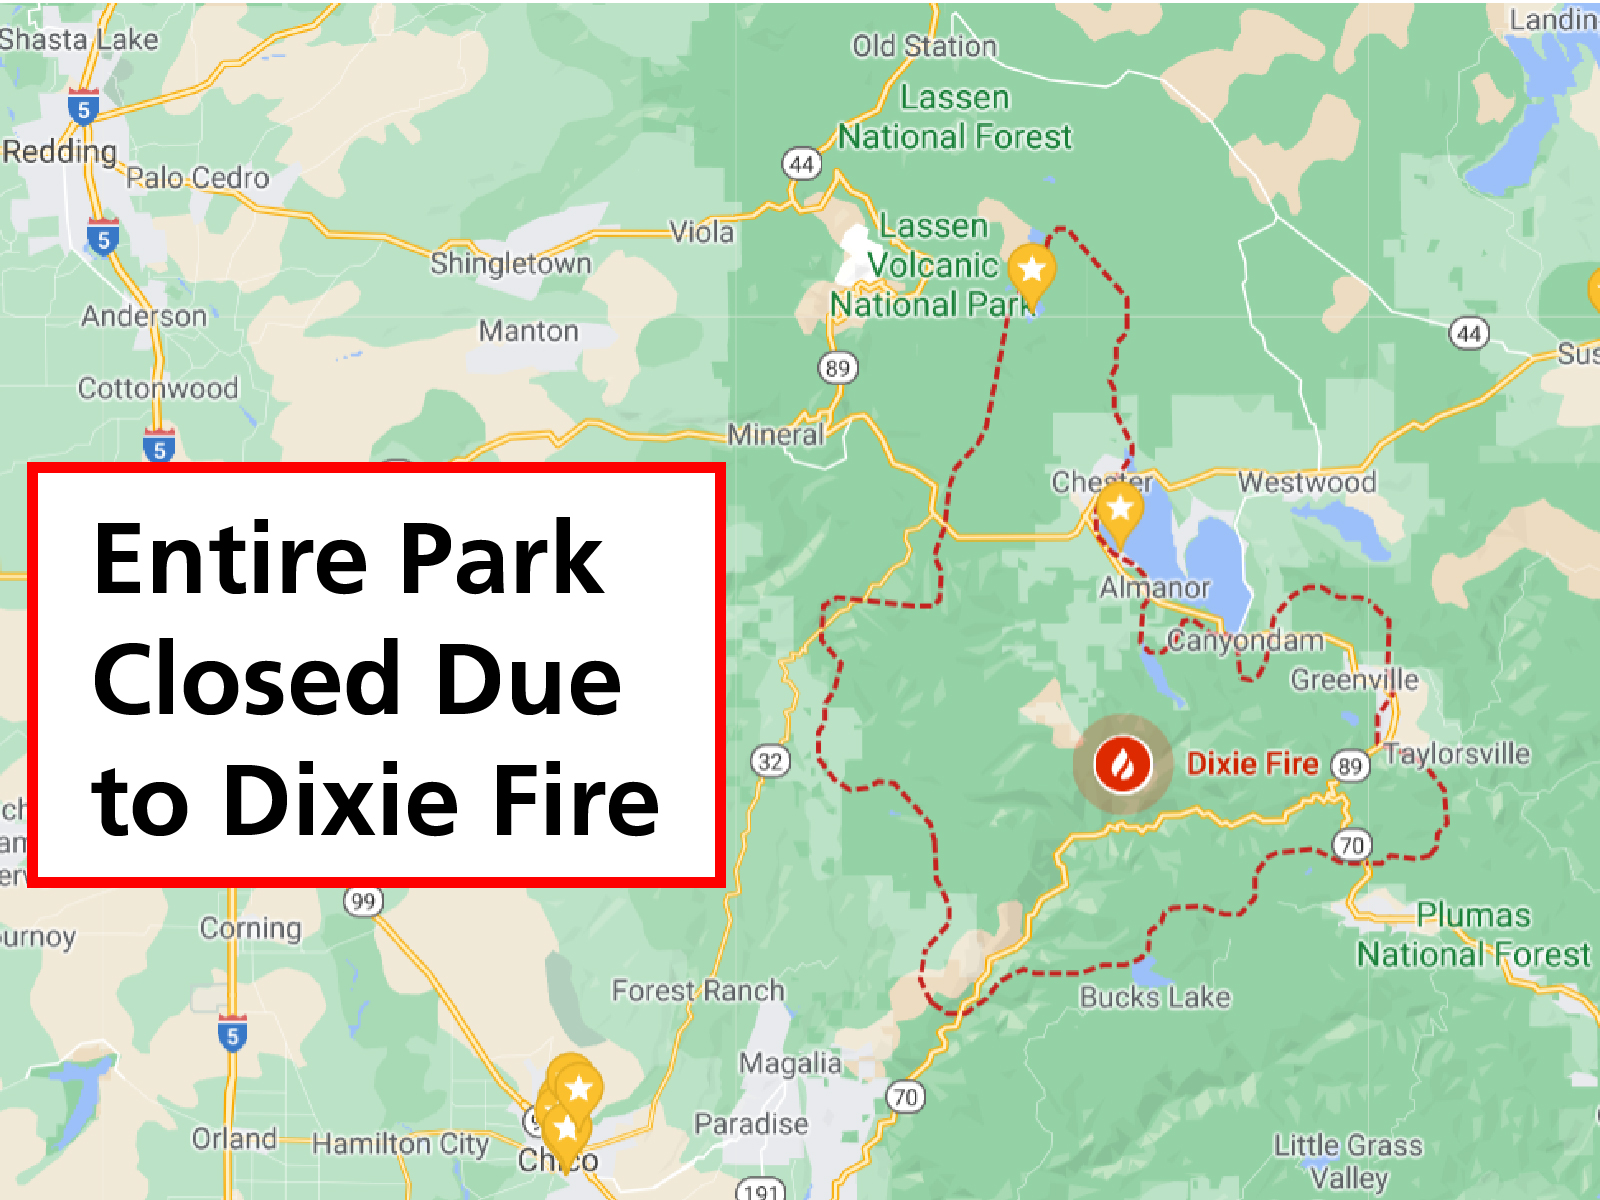 Map of perimeter of the Dixie Fire